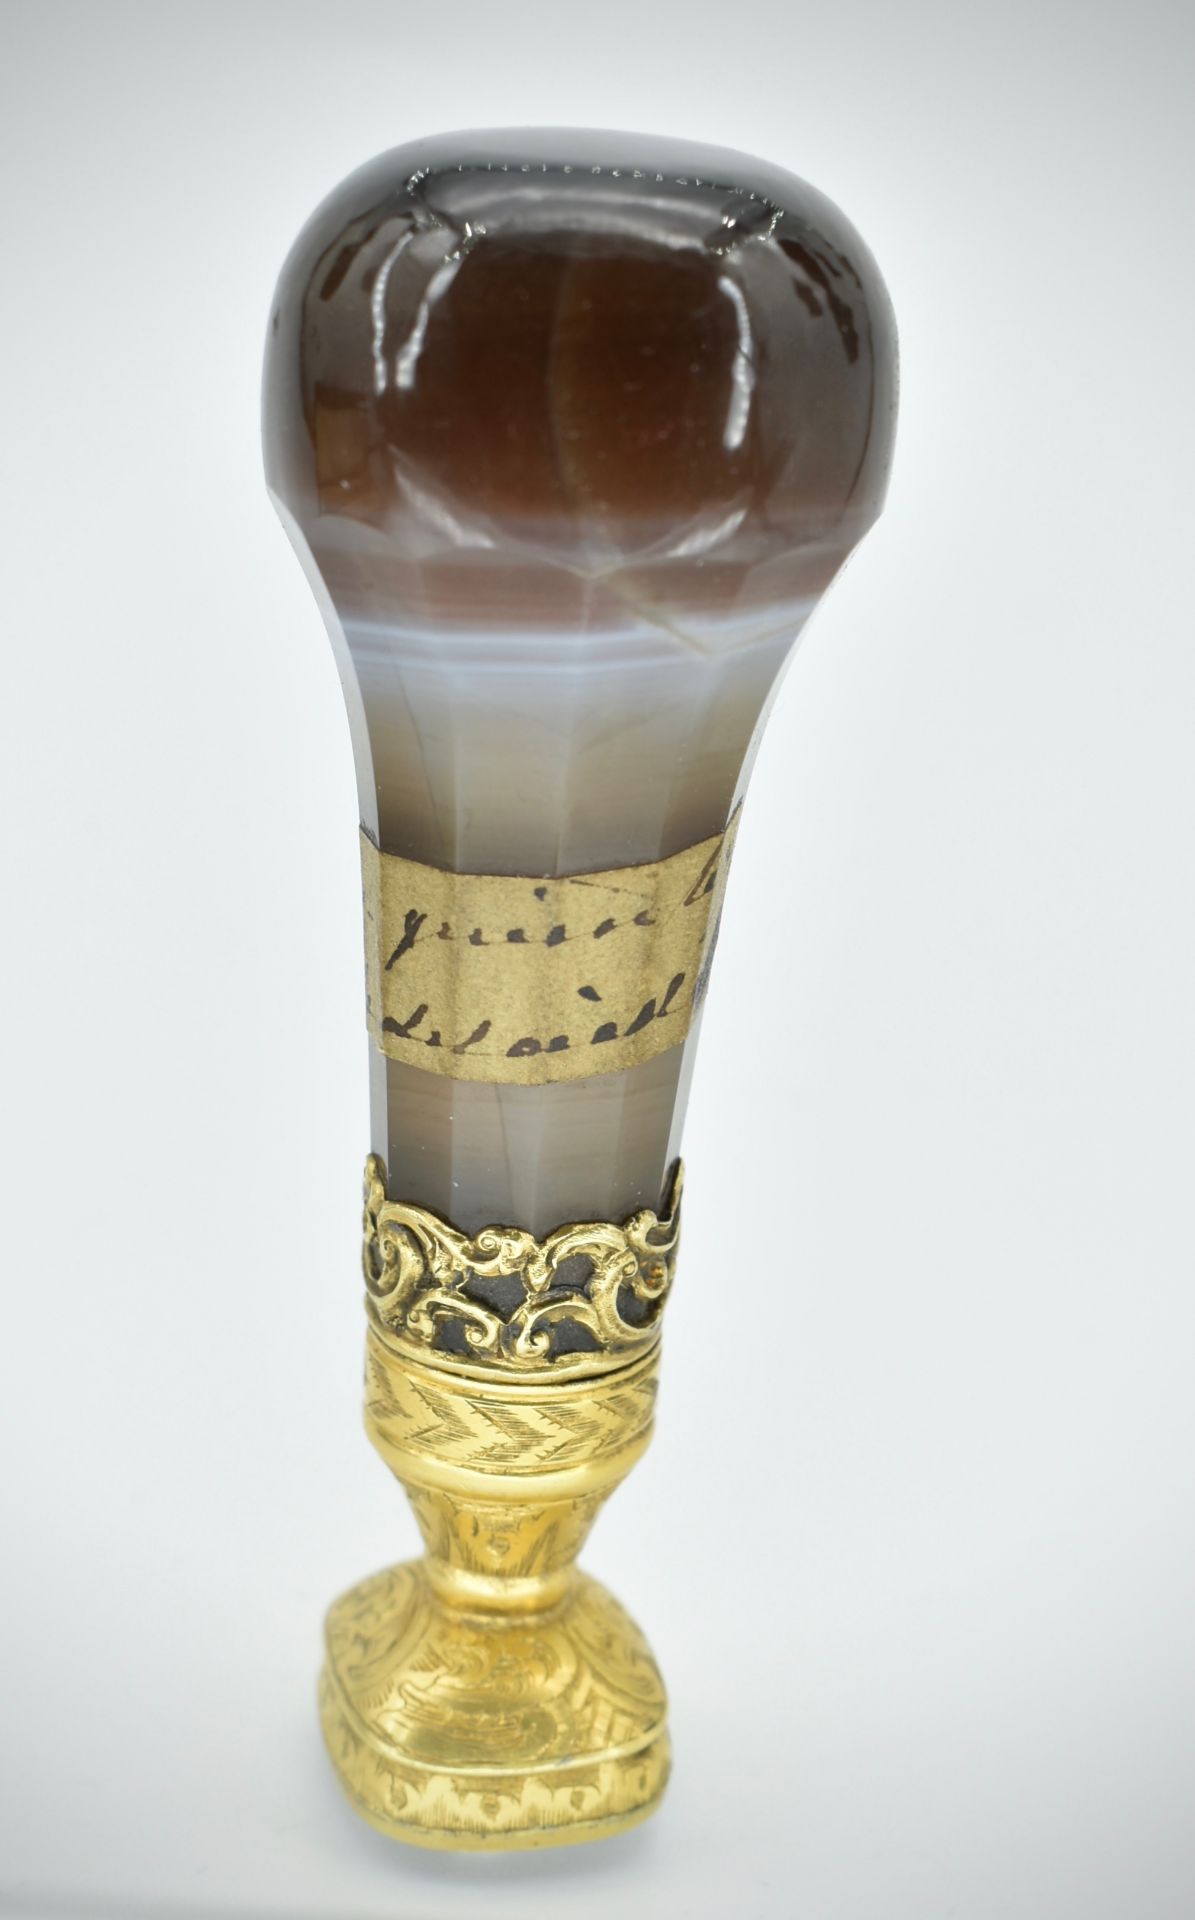 19th Century Banded Agate Desk Wax Seal - Image 6 of 7